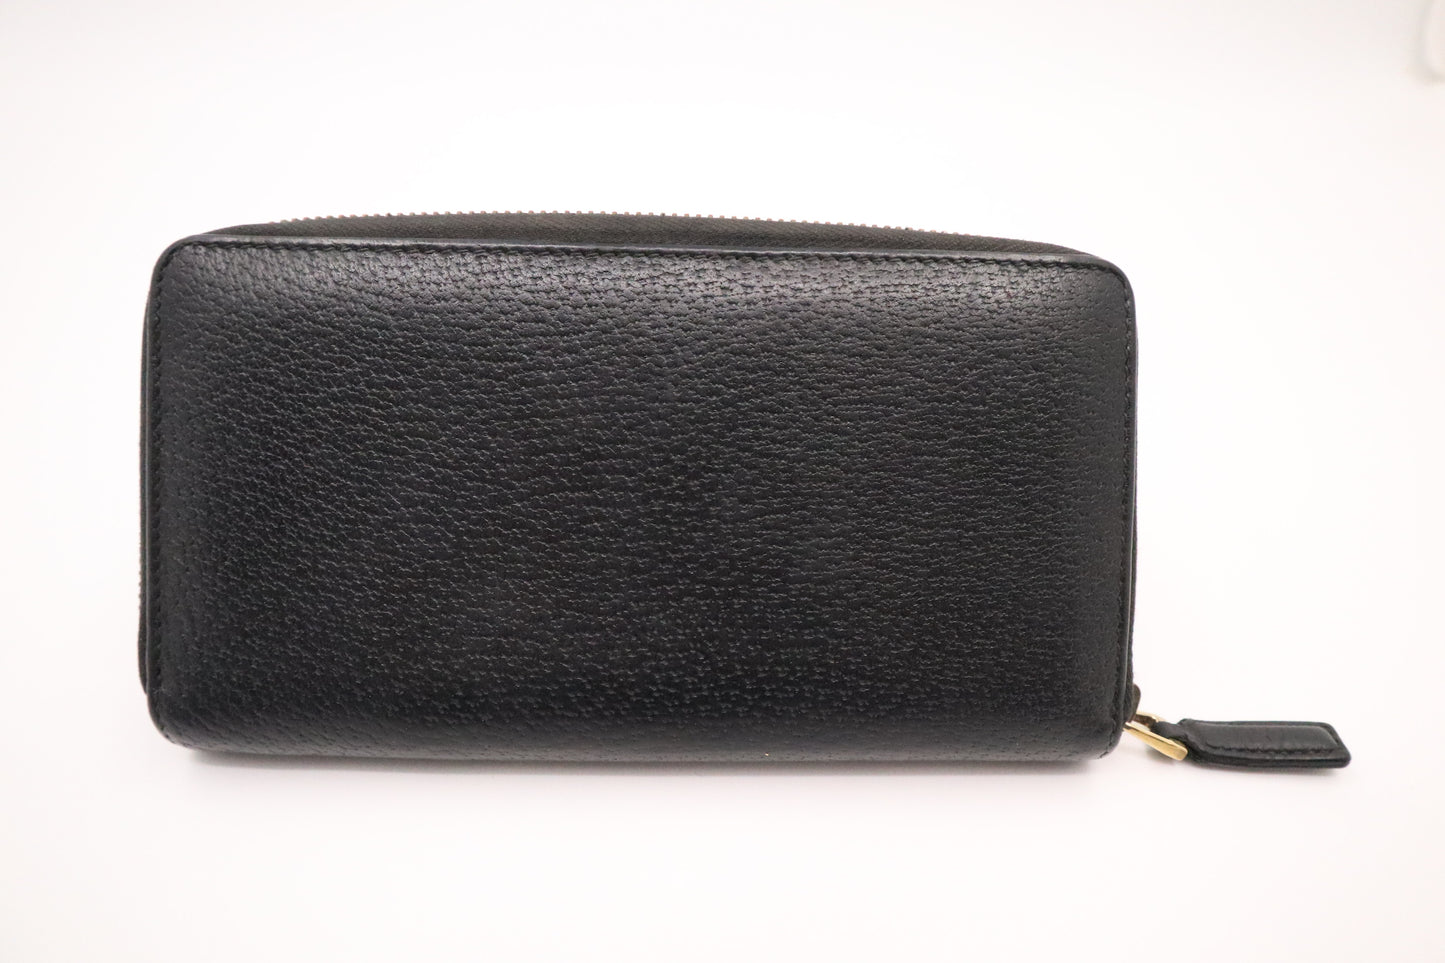 Gucci Long Wallet in Black Leather